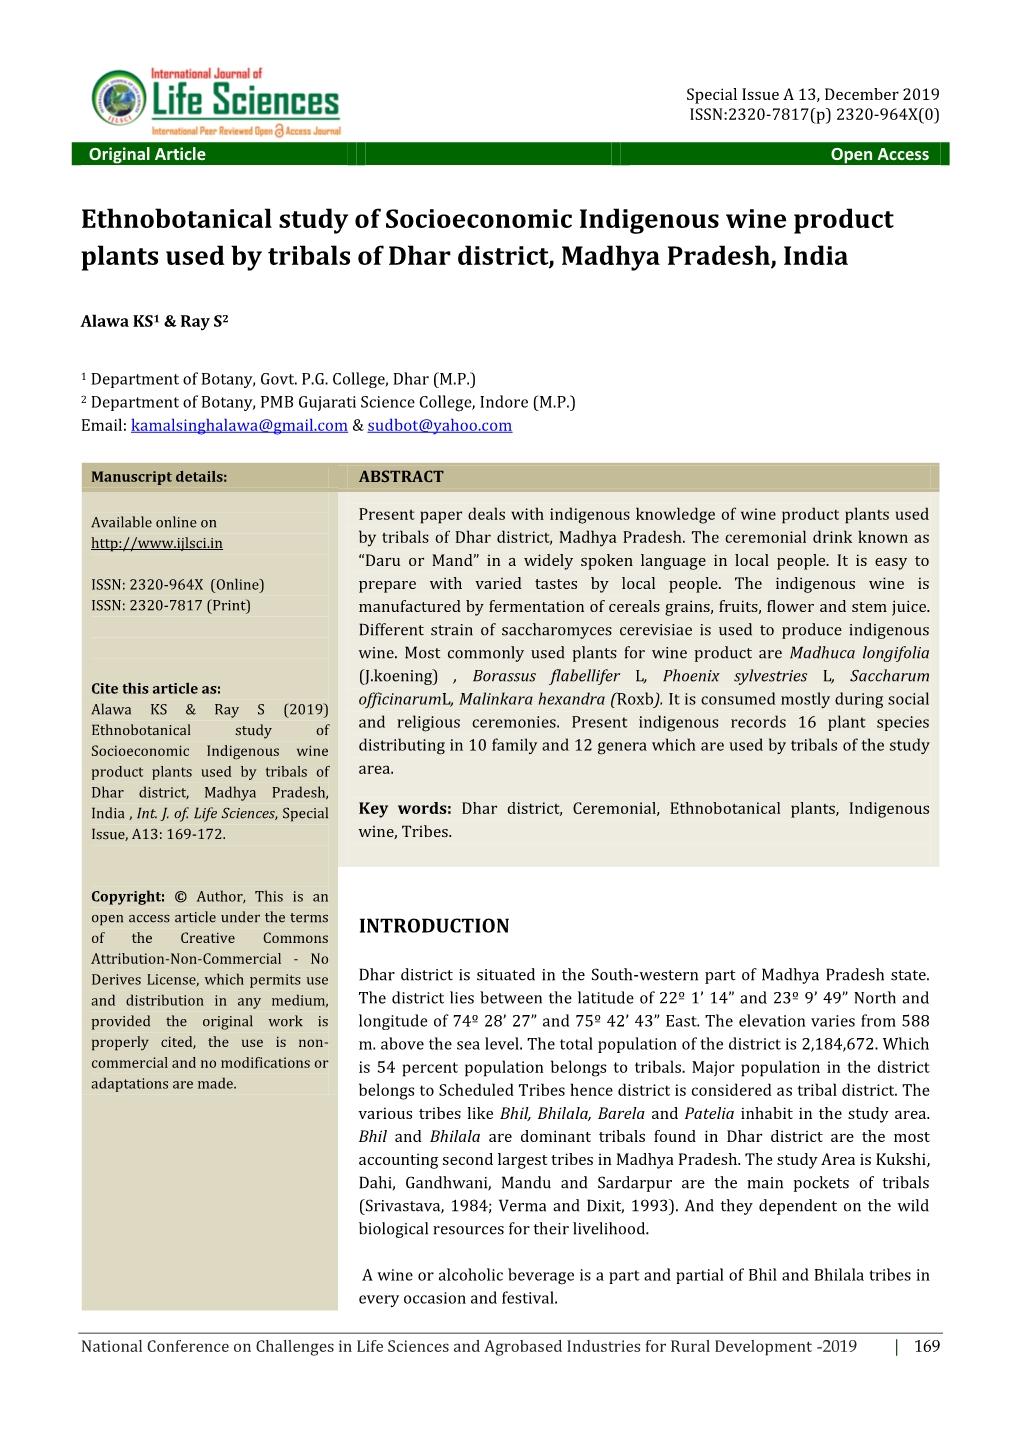 Ethnobotanical Study of Socioeconomic Indigenous Wine Product Plants Used by Tribals of Dhar District, Madhya Pradesh, India